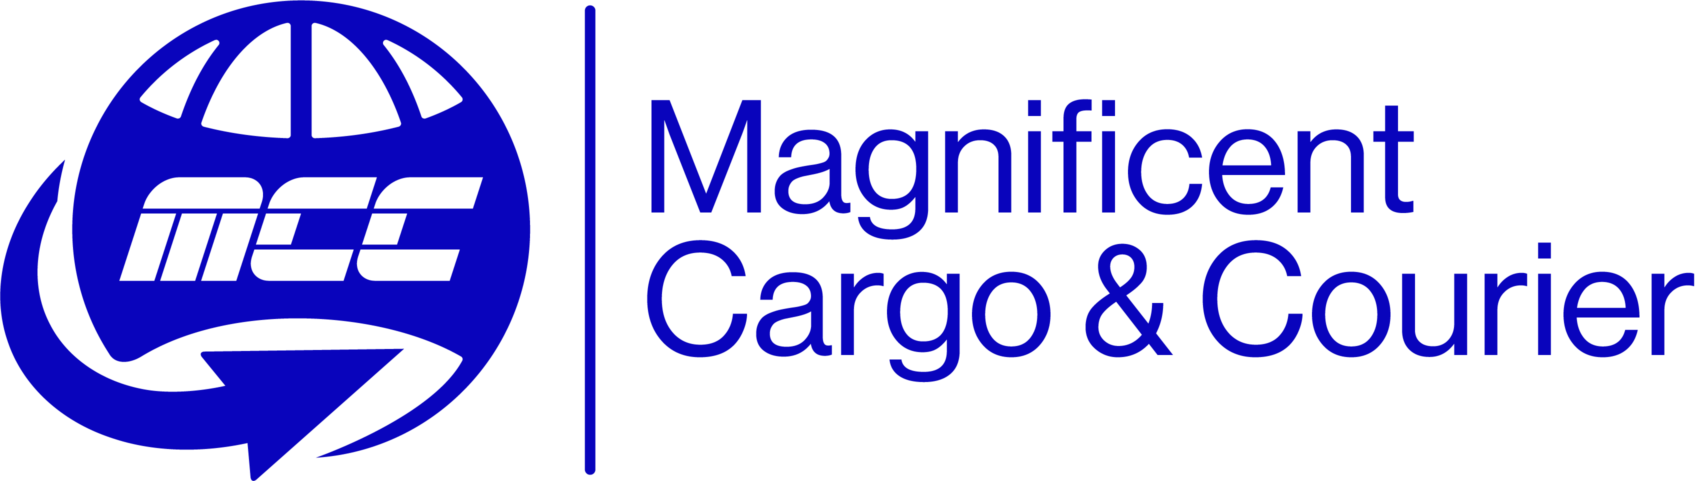 Mcc Magnificient Cargo and Courier Logo